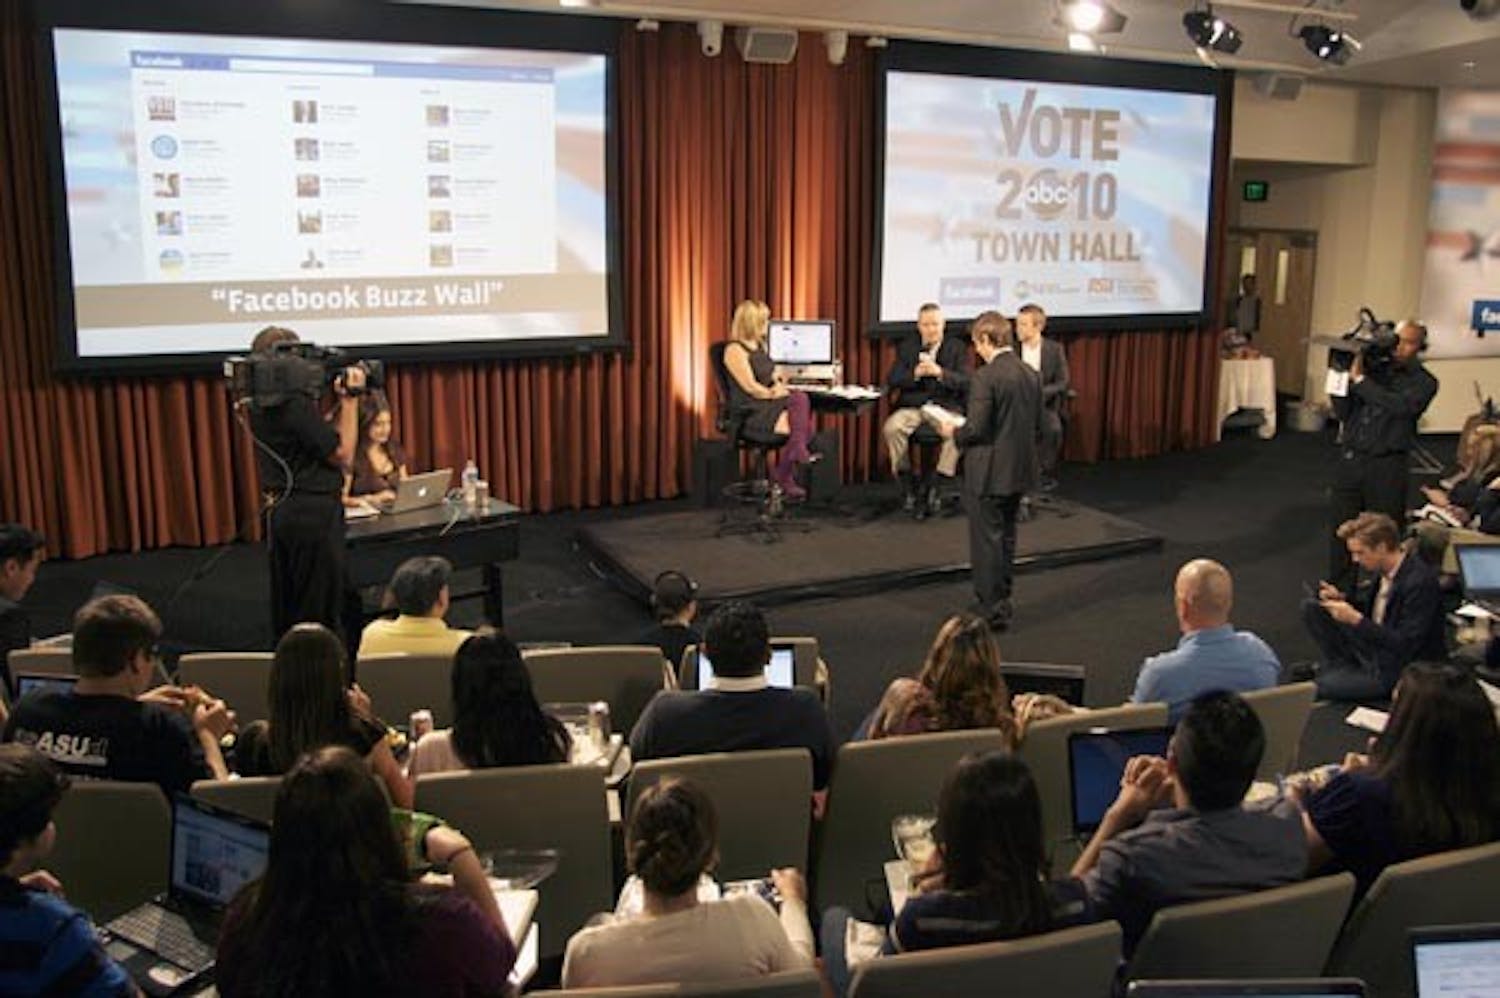 LIVE COVERAGE: ABC News, Facebook and the Walter Cronkite School of Journalism and Mass Communication co-hosted an election town hall Tuesday night. Co-hosted by ABC’s David Muir, the town hall meeting was streamed live onto Facebook and ABC News. (Photo by Scott Stuk)